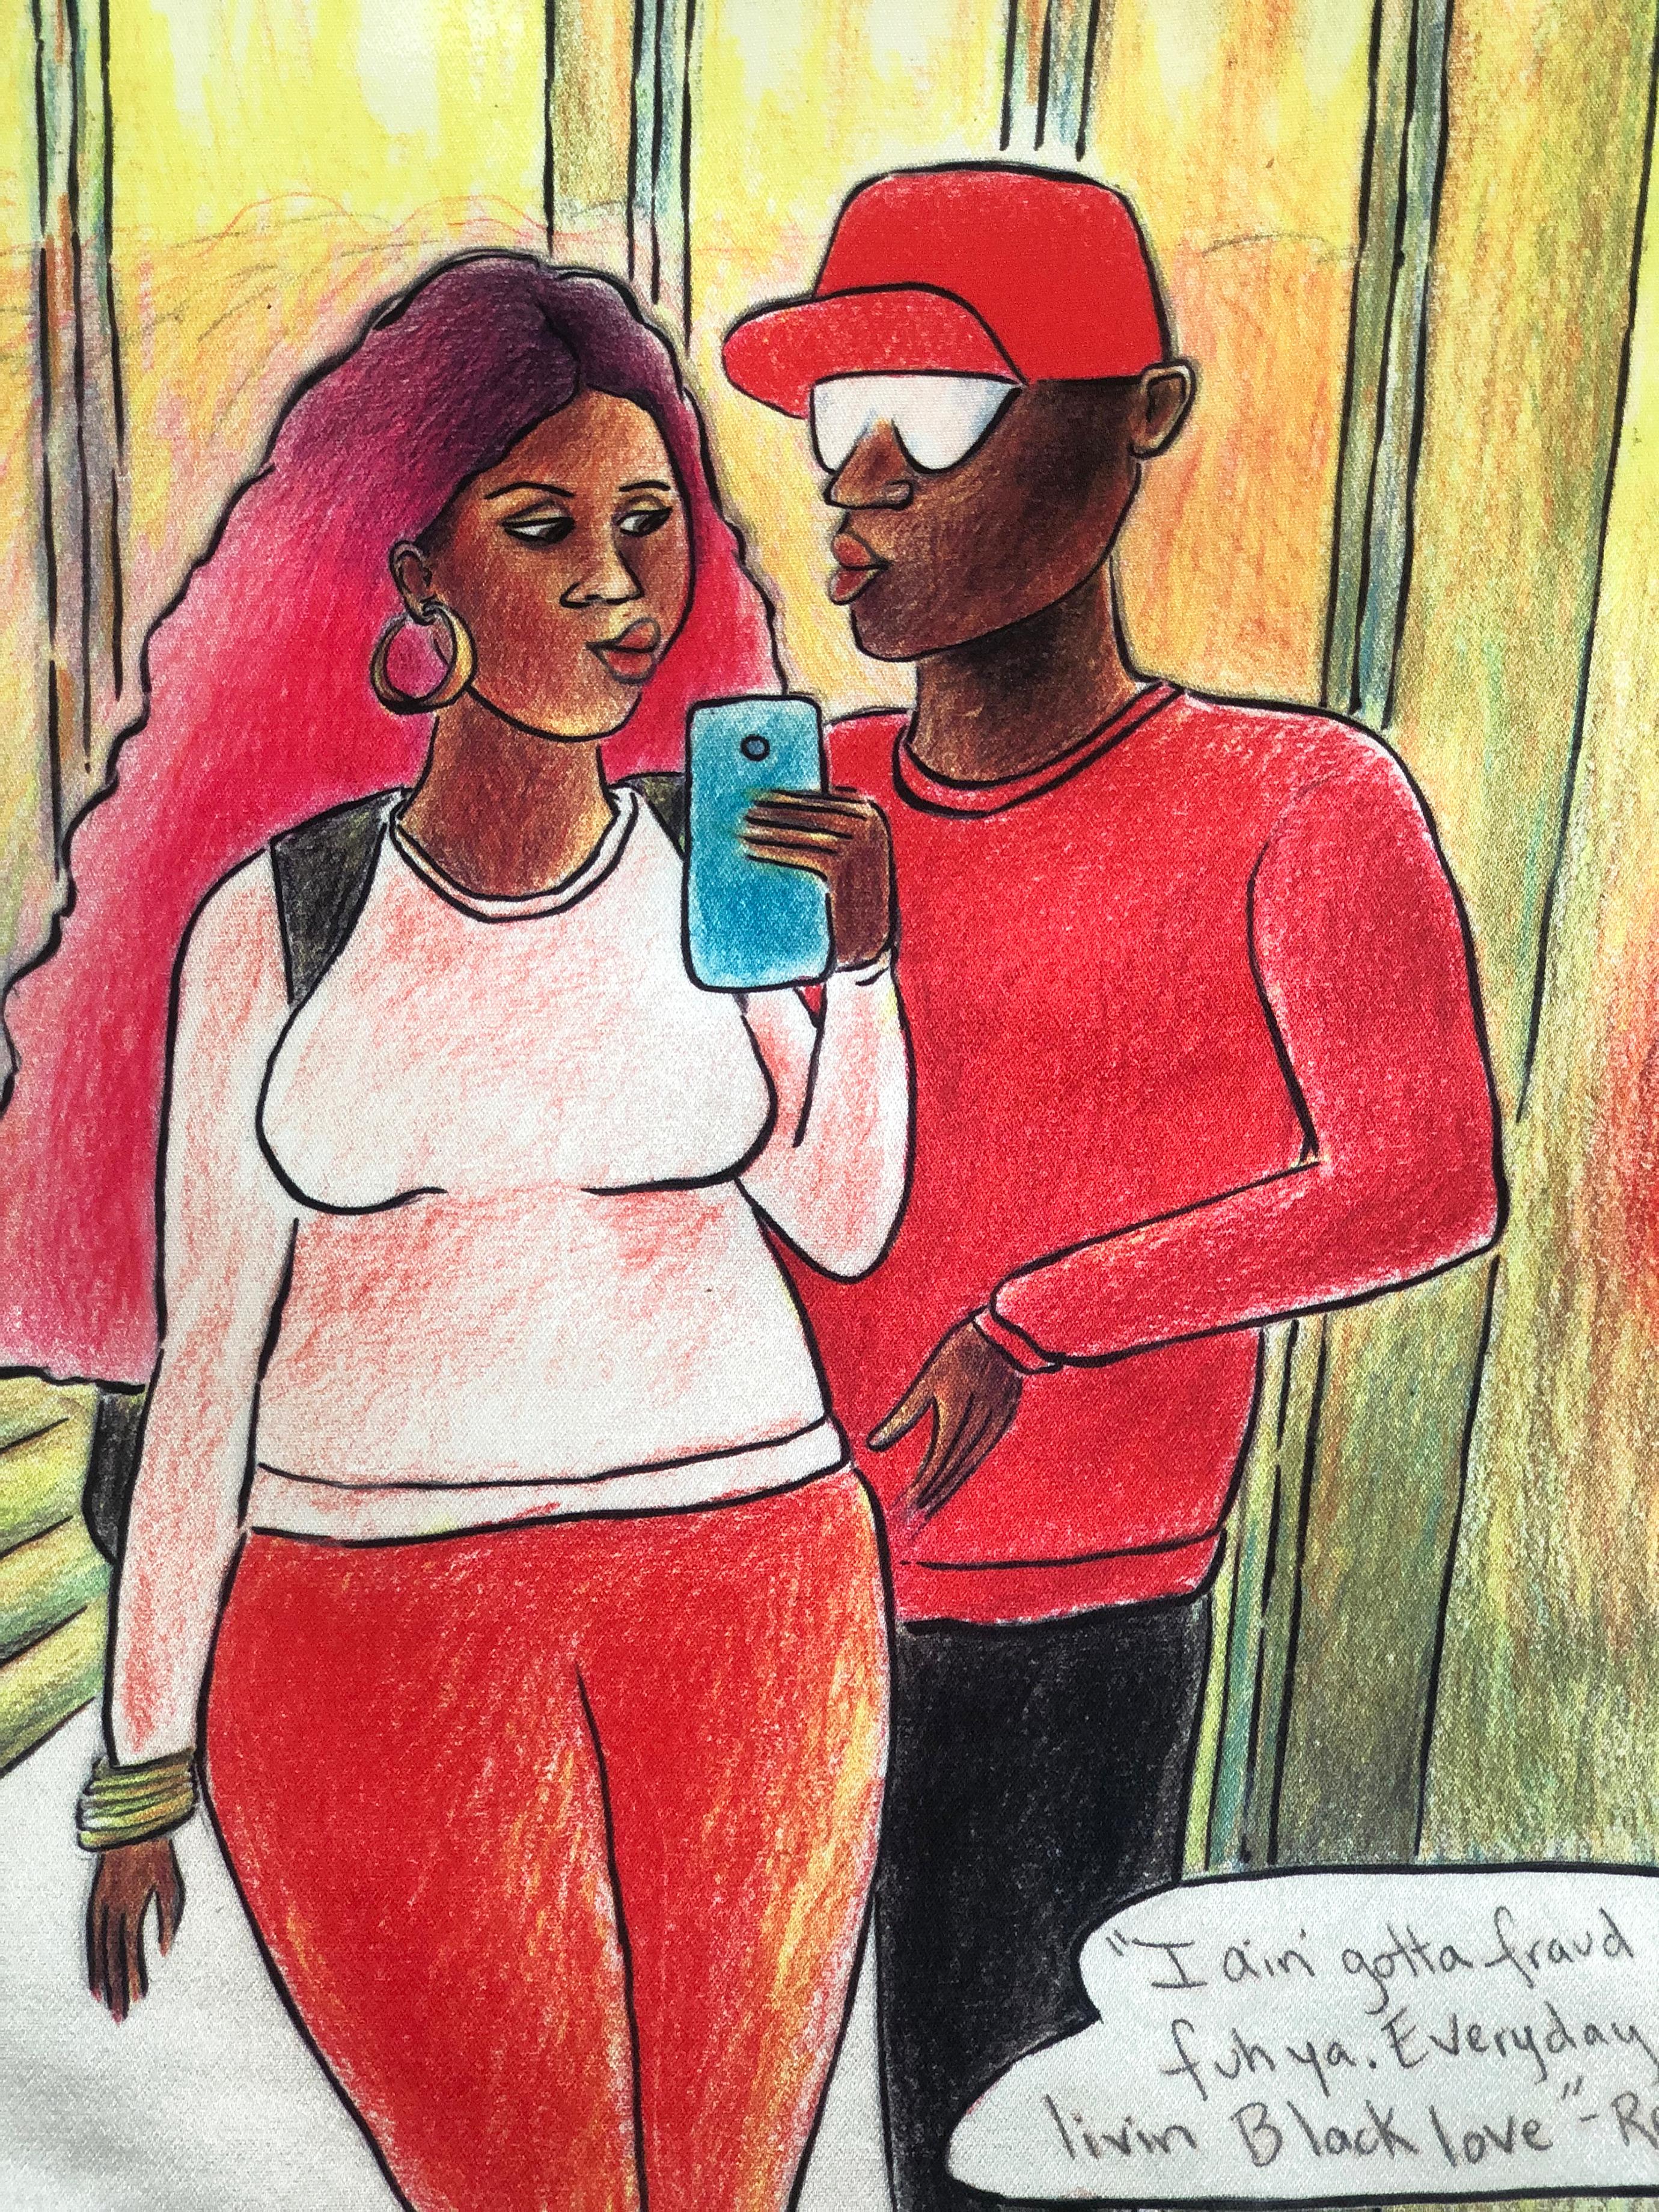 "The Rapper With The Pink Hair" colored pencils on archival paper - Print by Zeal Harris